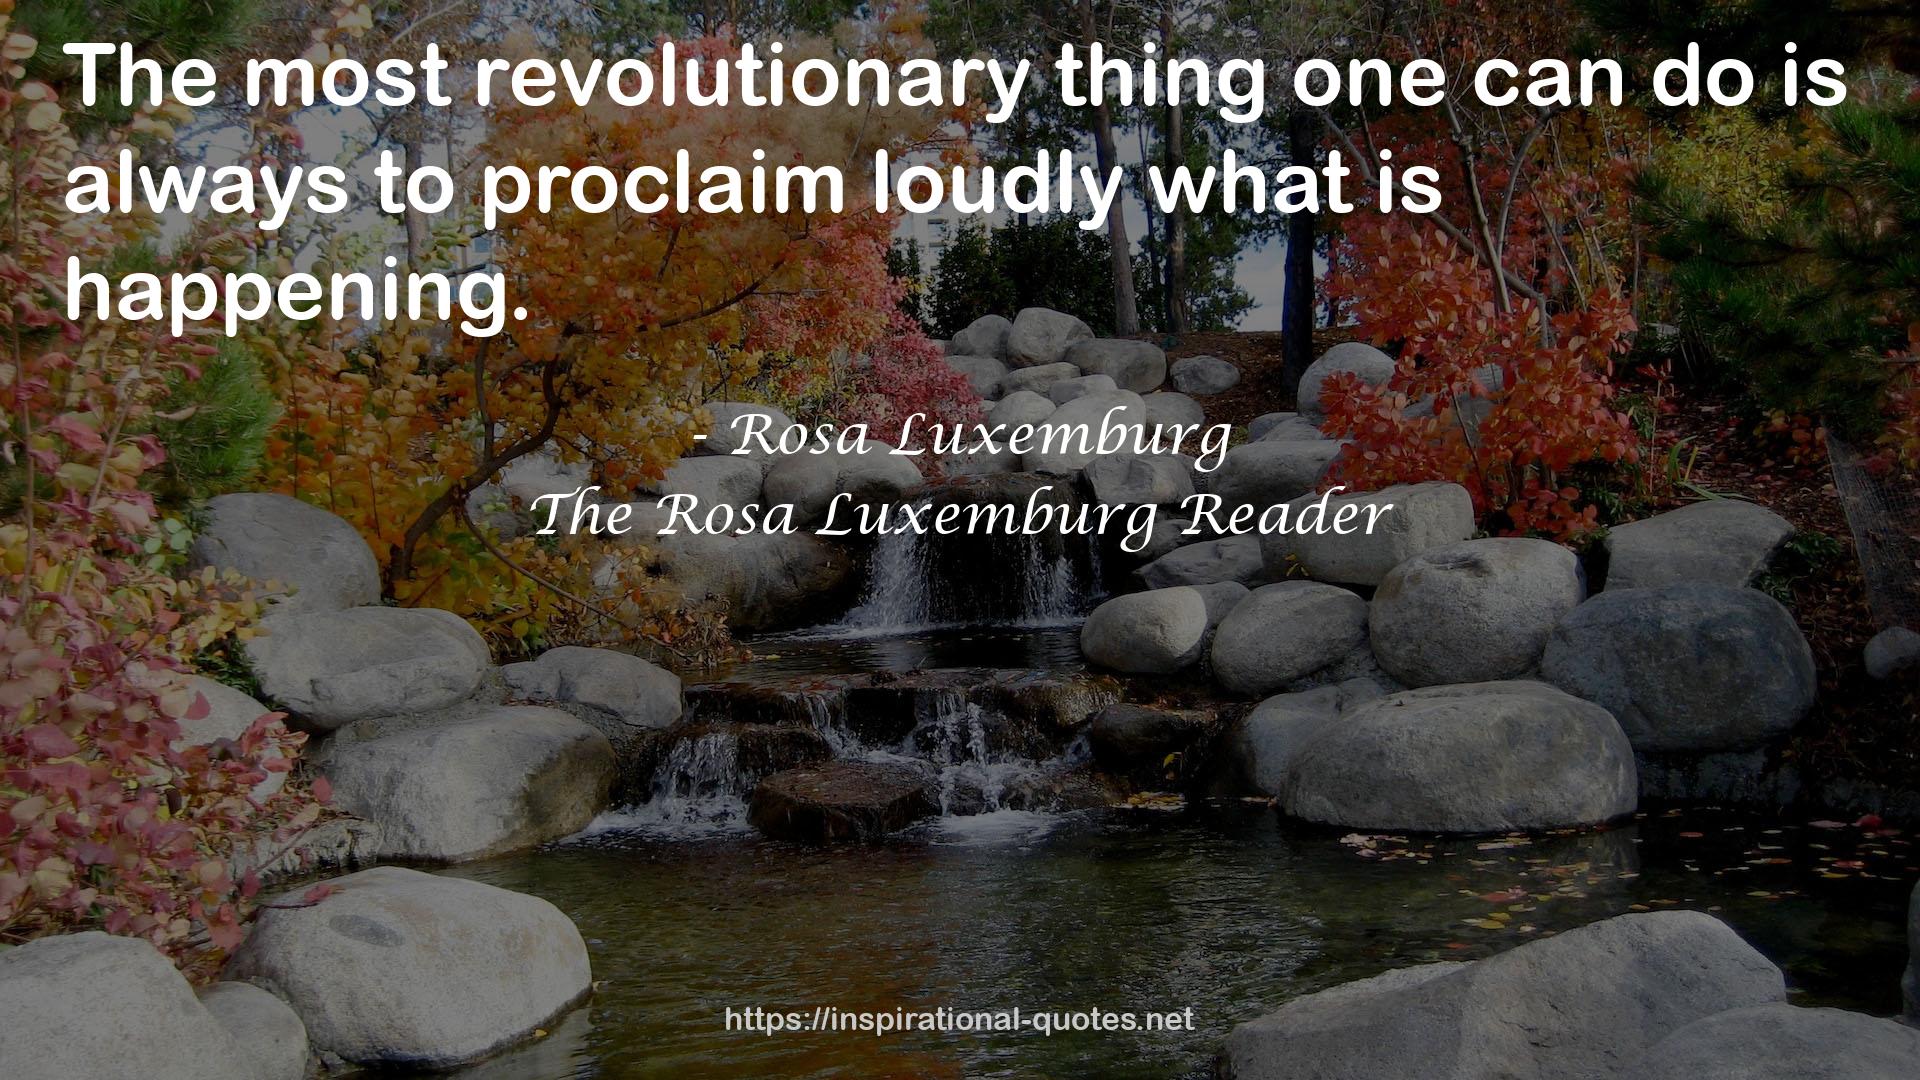 The Rosa Luxemburg Reader QUOTES